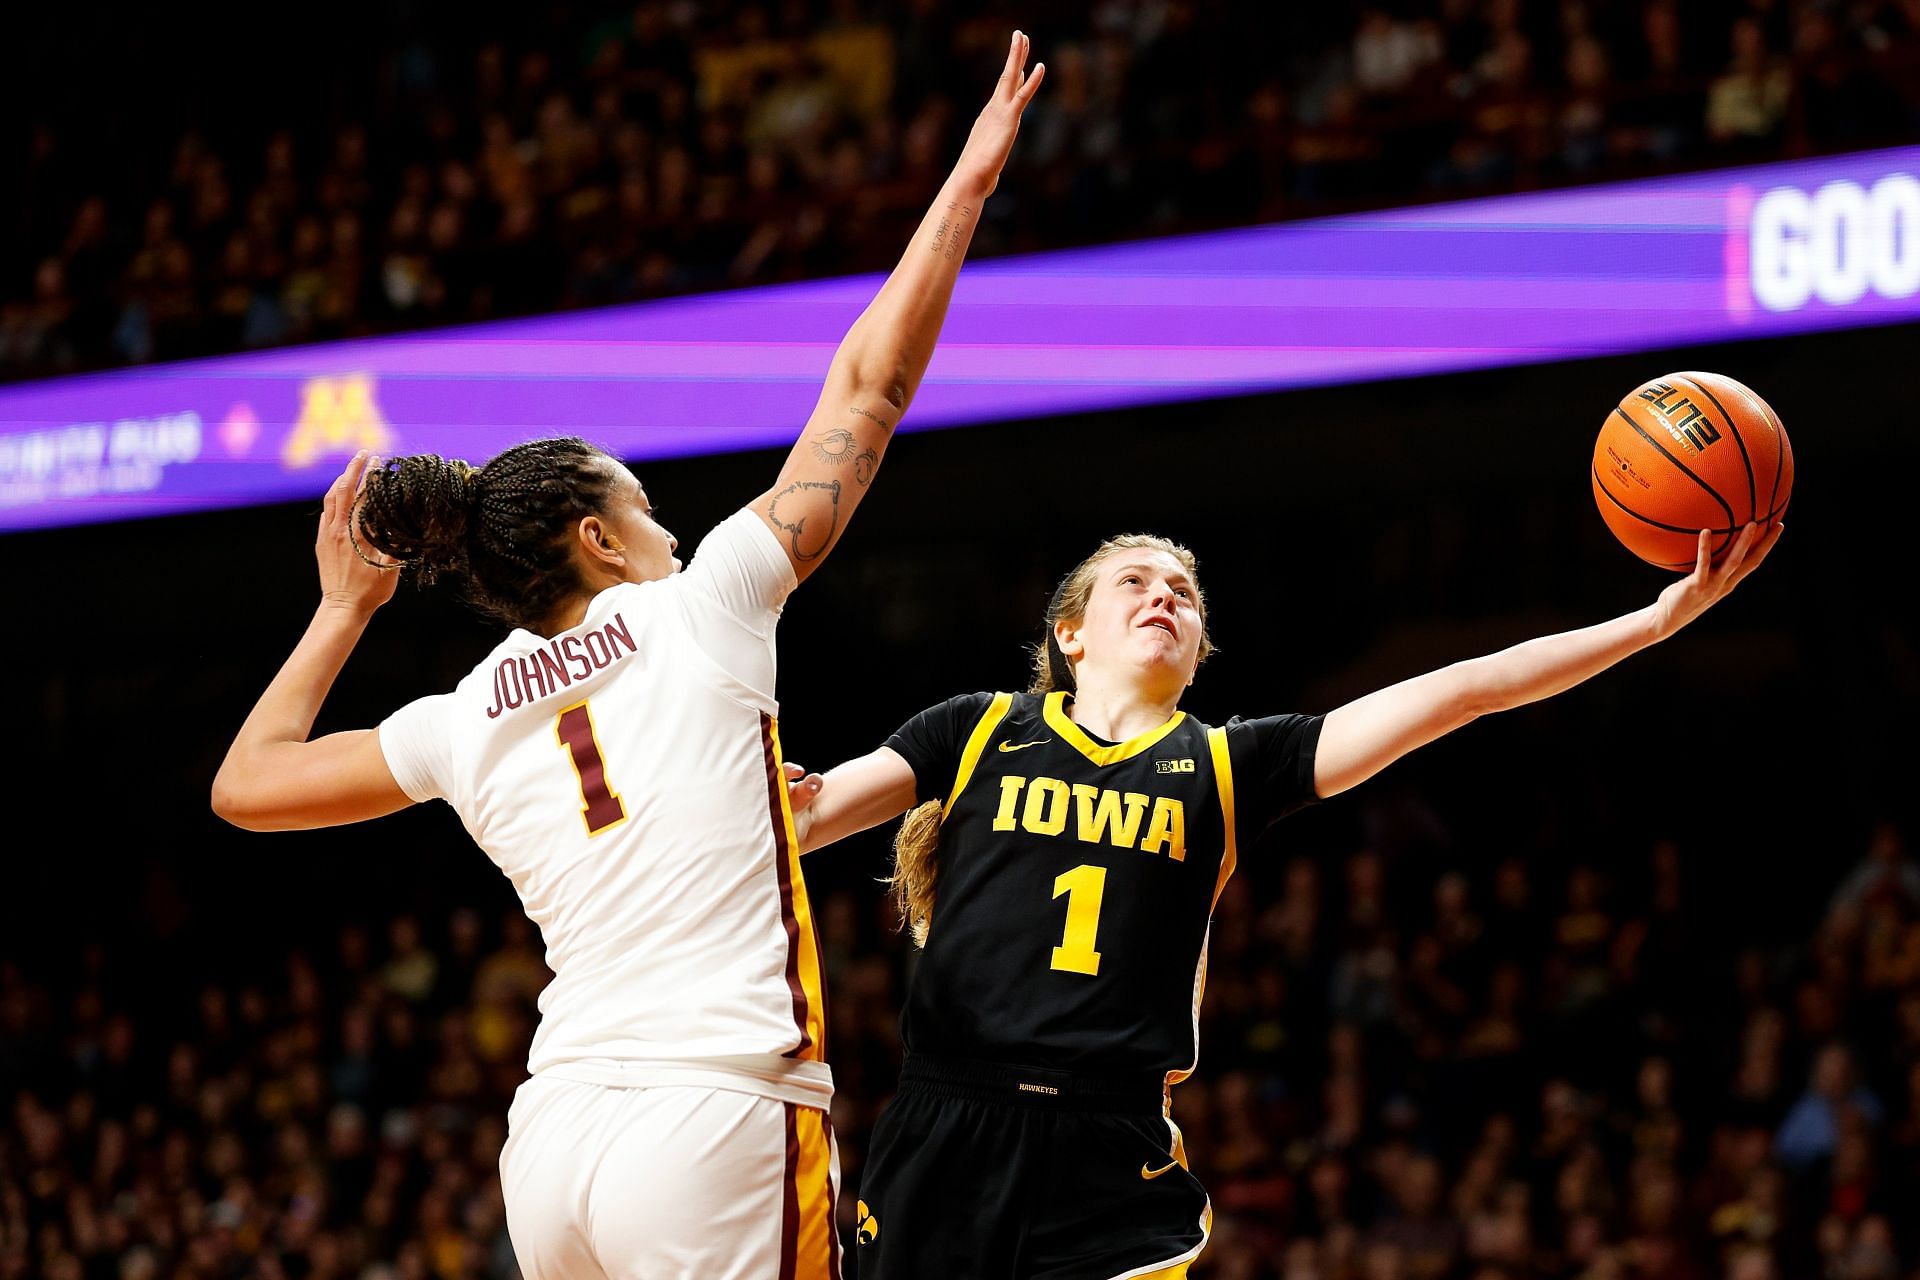 Molly Davis was injured late in the season, but had a great prior run at Central Michigan and shot the ball very well for the Hawkeyes.